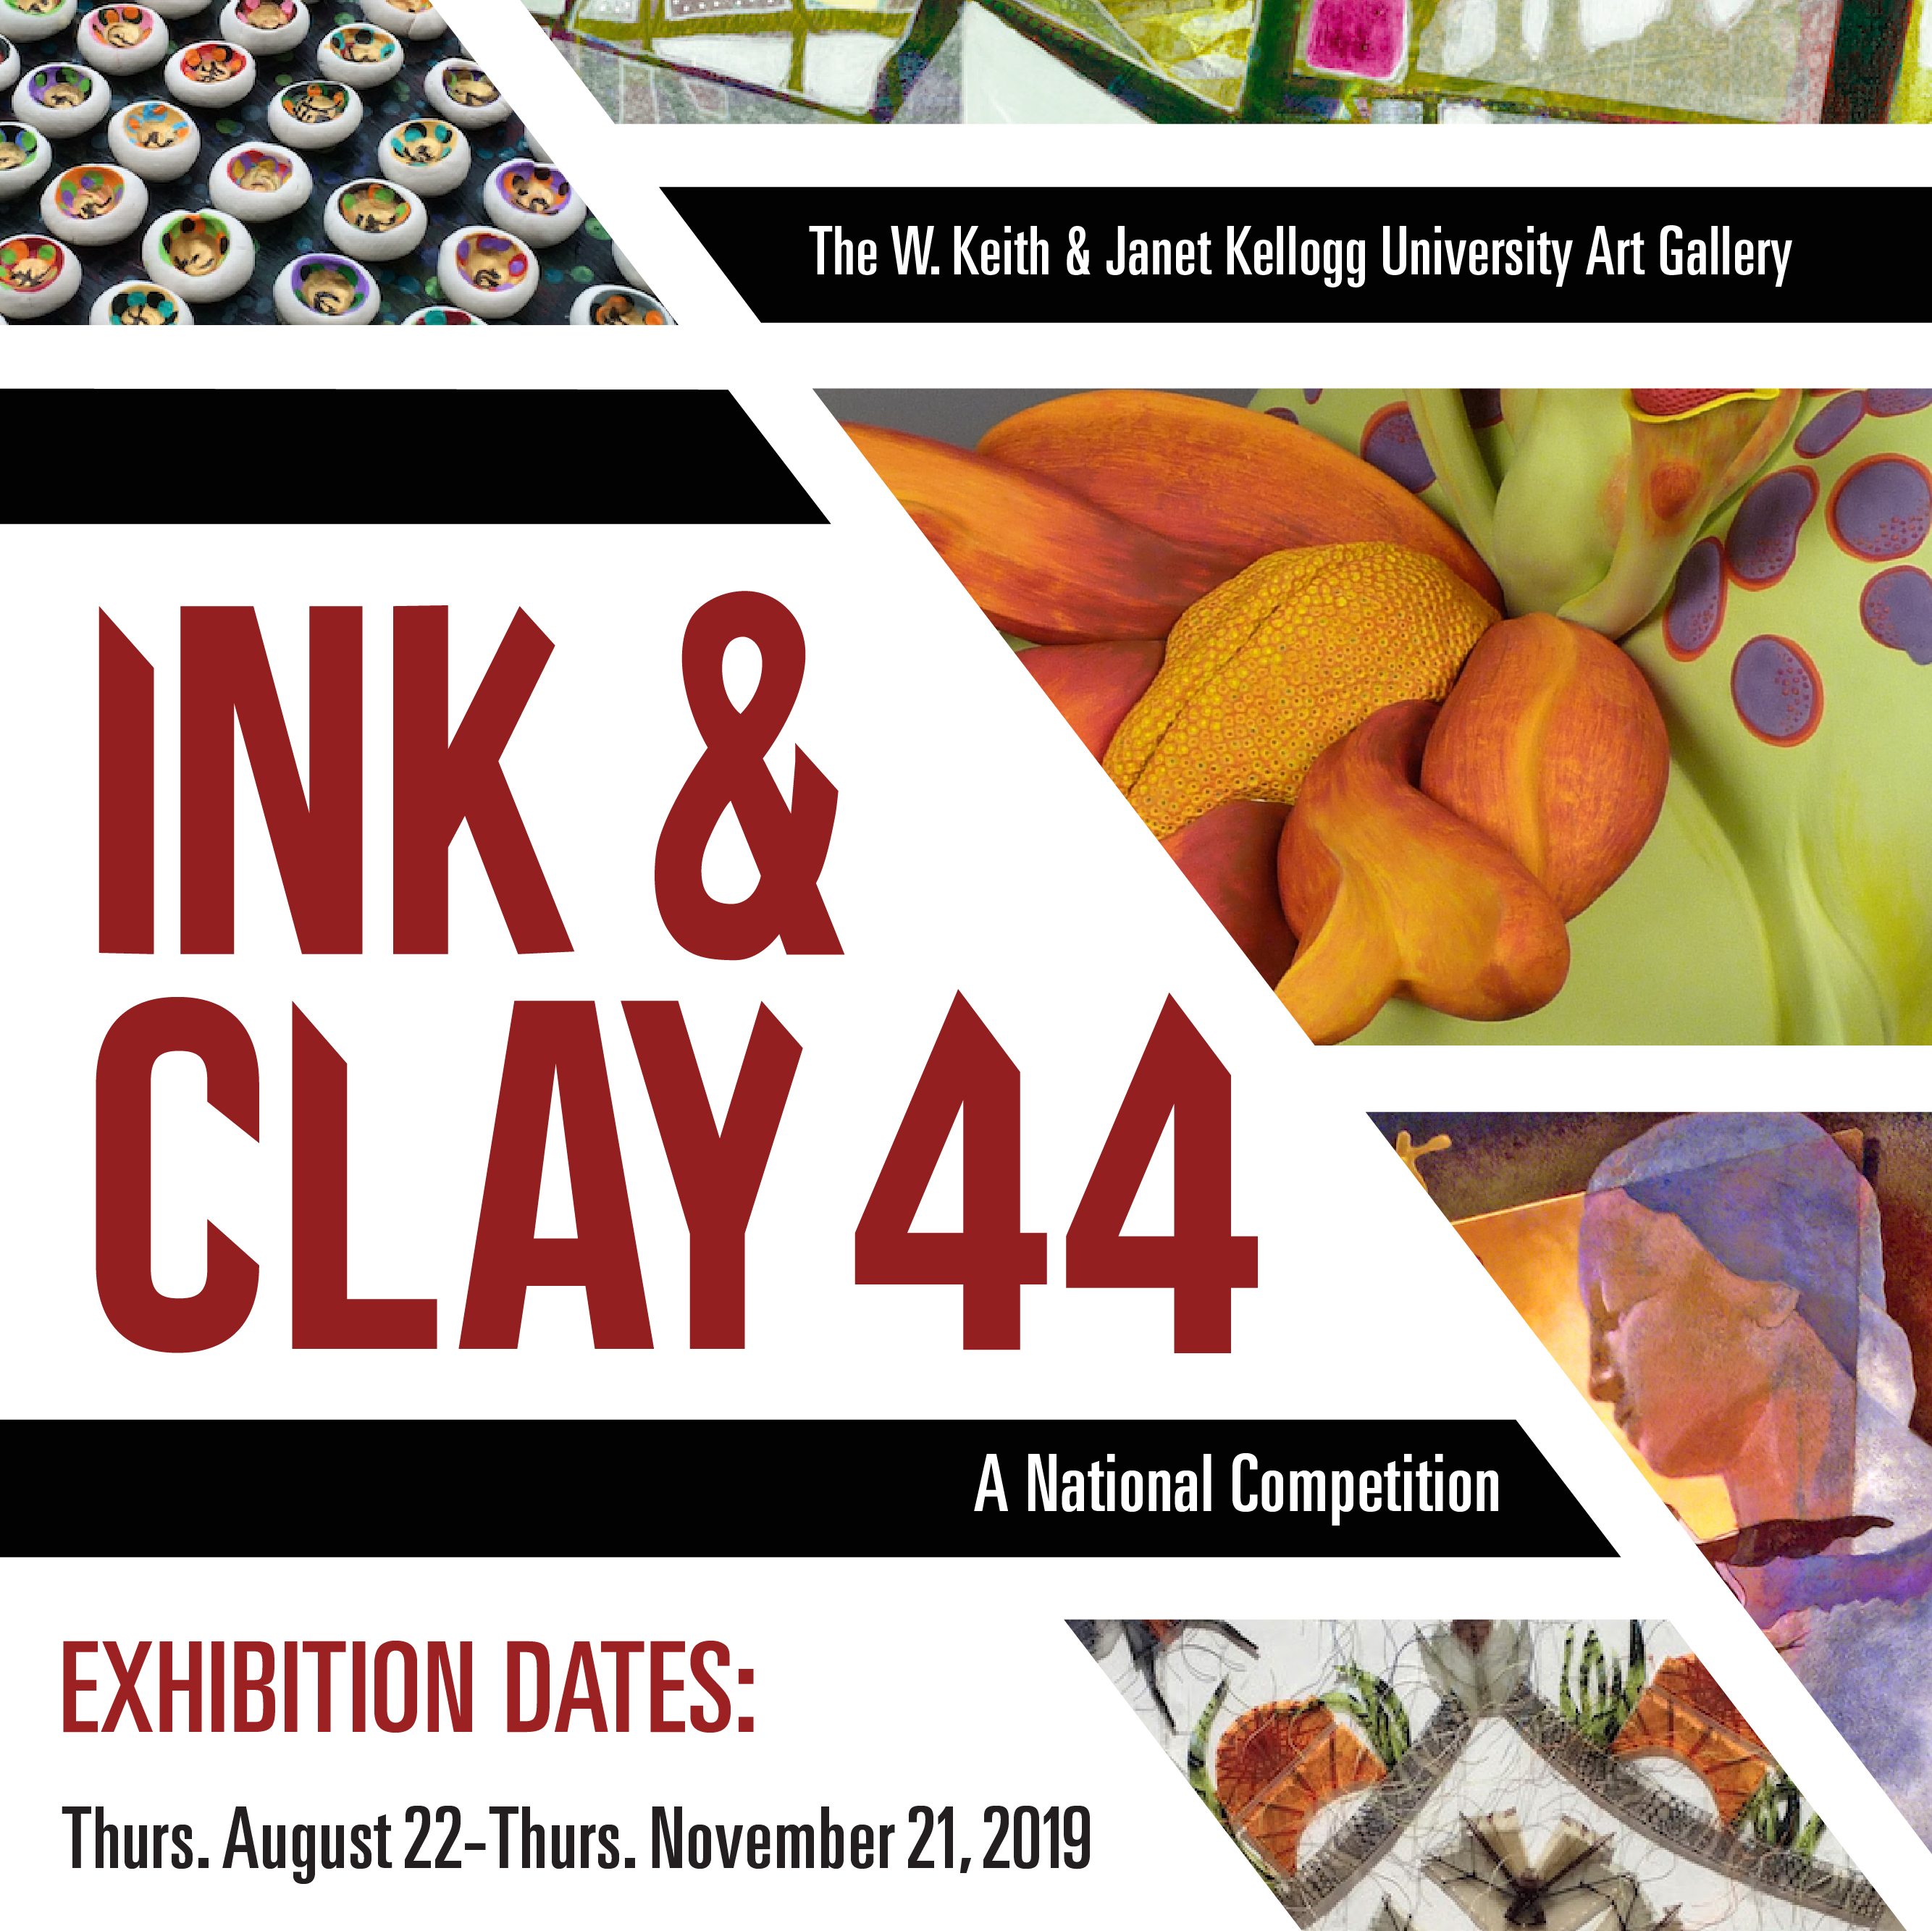 The W. Keith and Janet Kellogg Art Gallery. Ink & Clay 44. A National Competition. Thursday, August 22 to Thursday, November 21, 2019